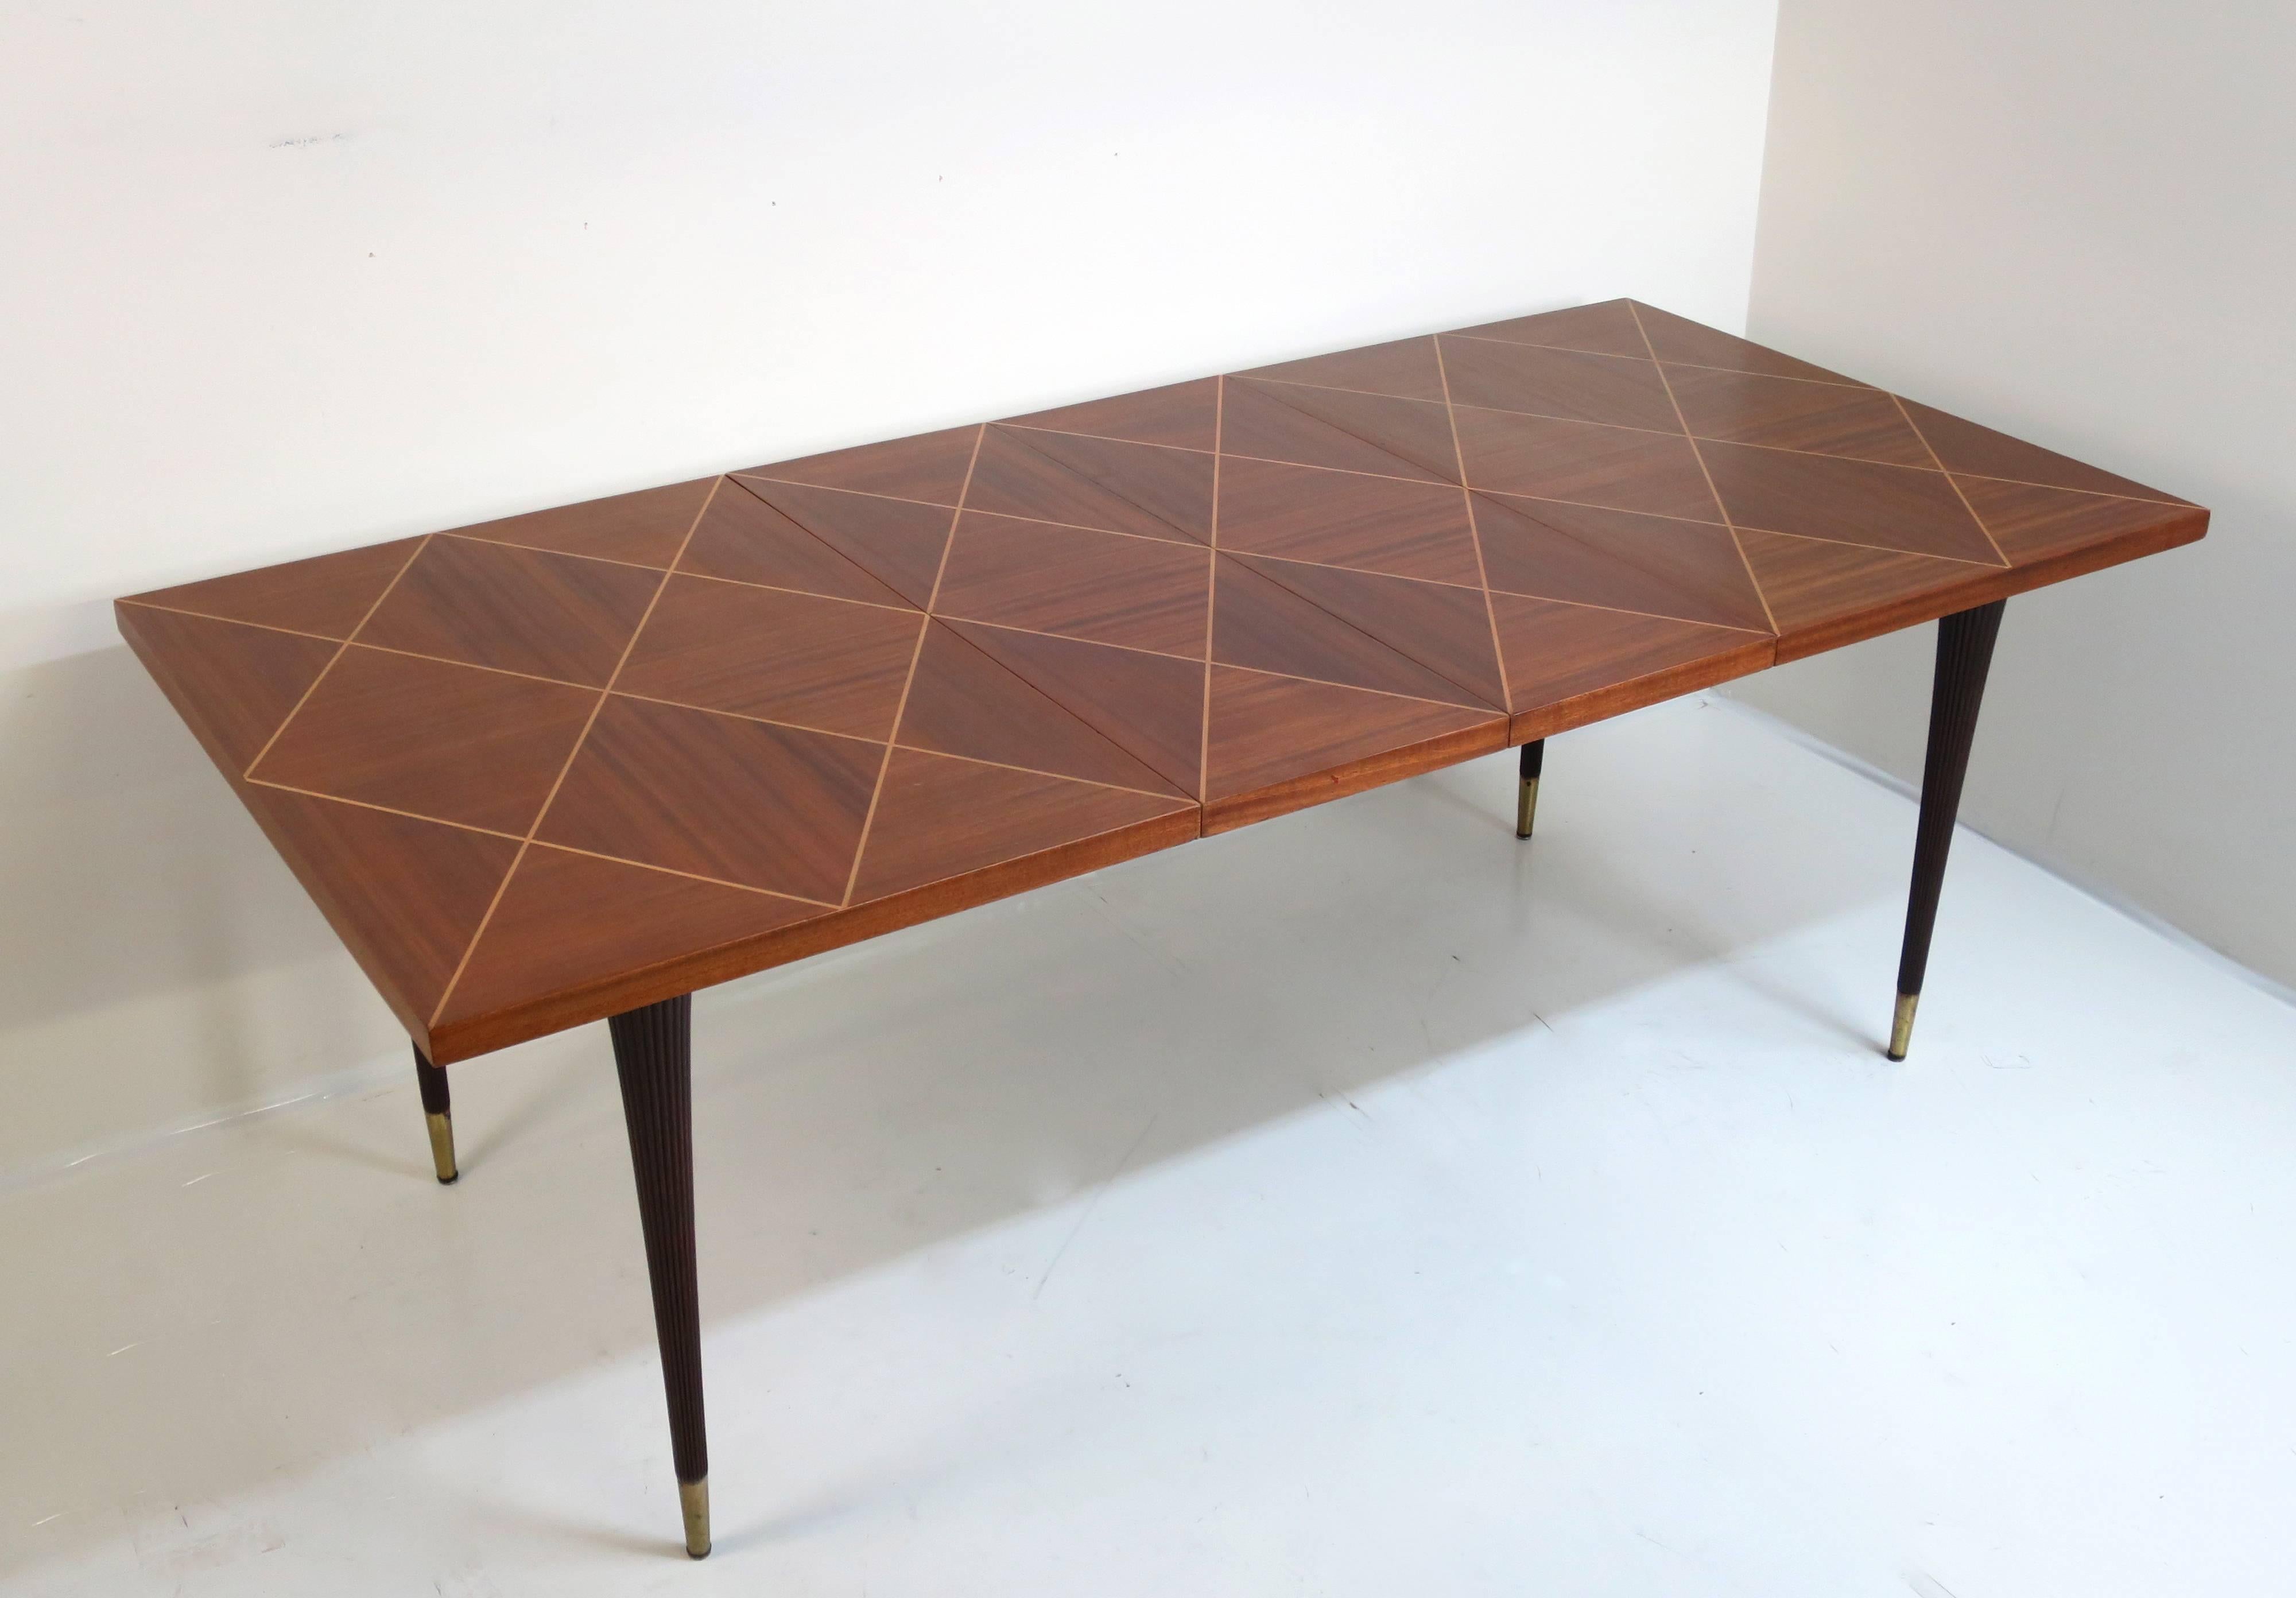 Tommi Parzinger dining table by Charak.
Tables measures 40